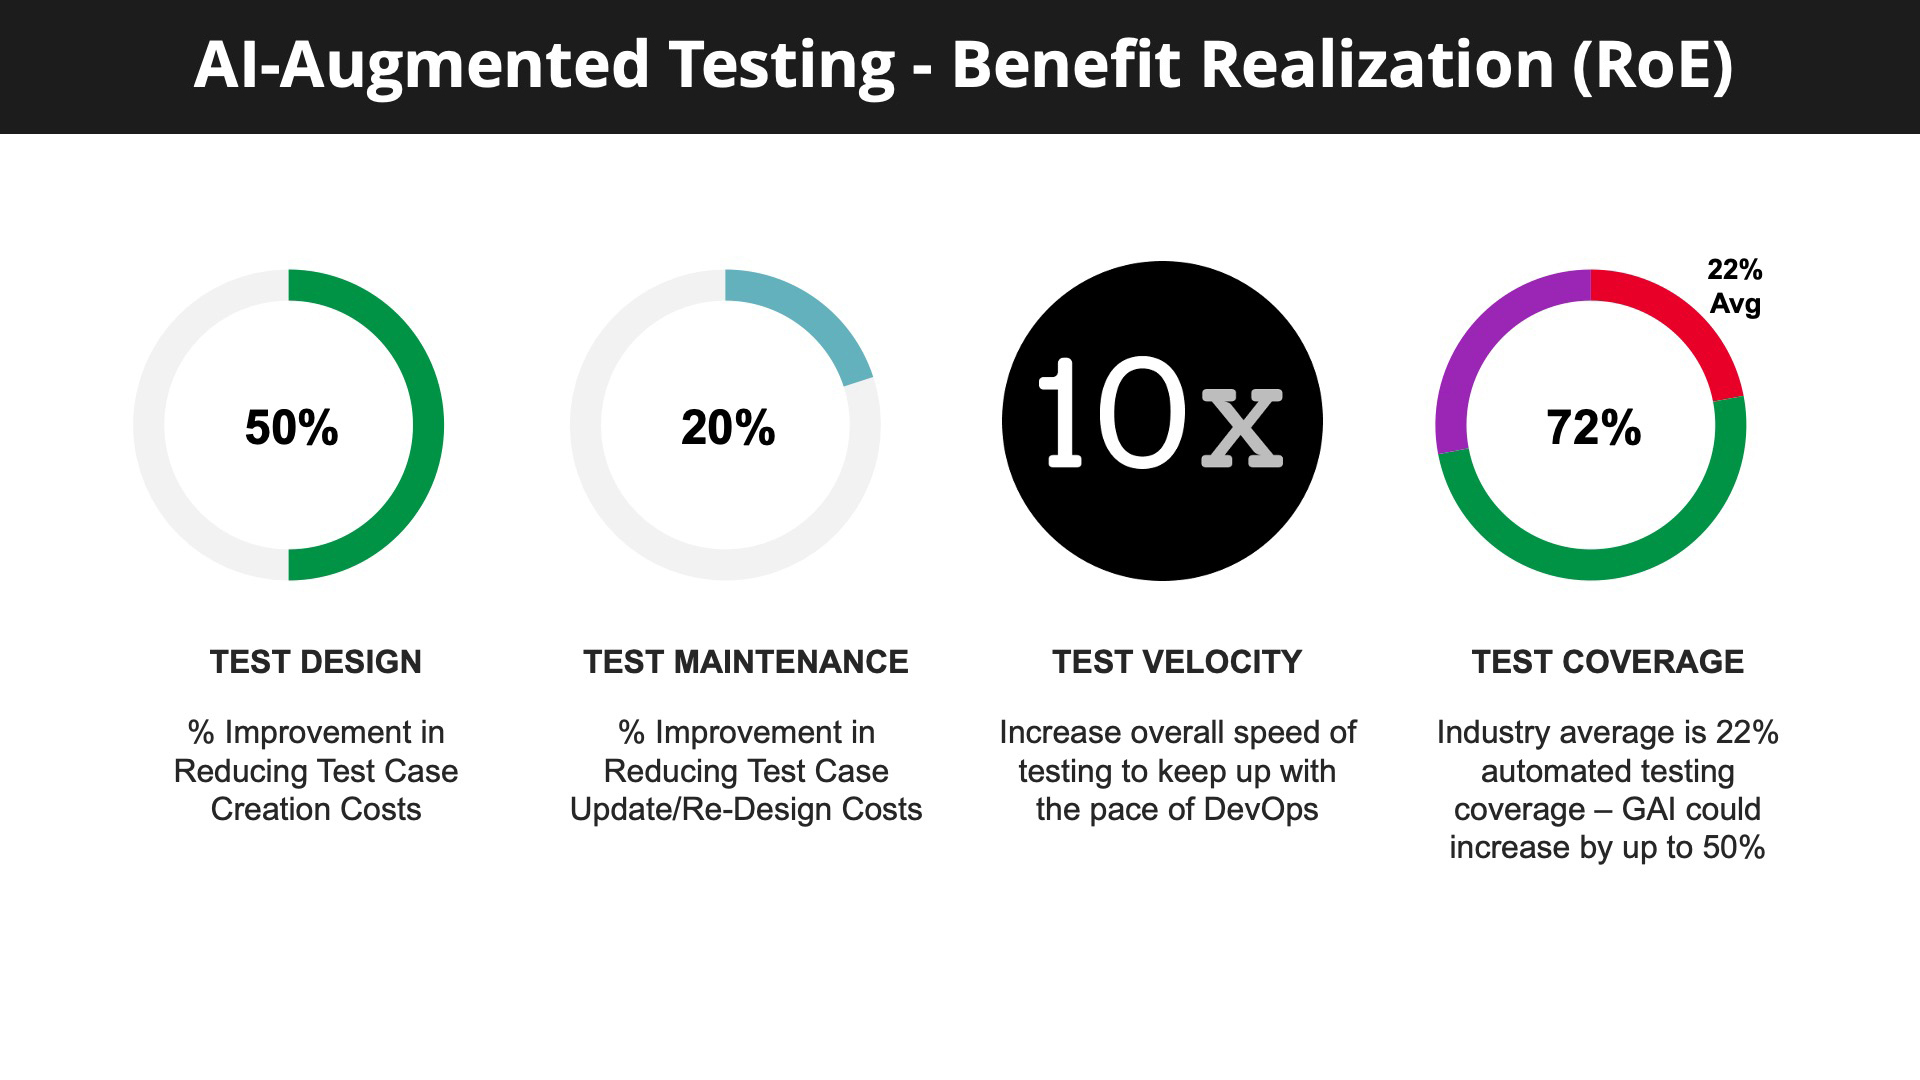 Fig 01 - AI-Augmented testing - benefit realization (RoE)